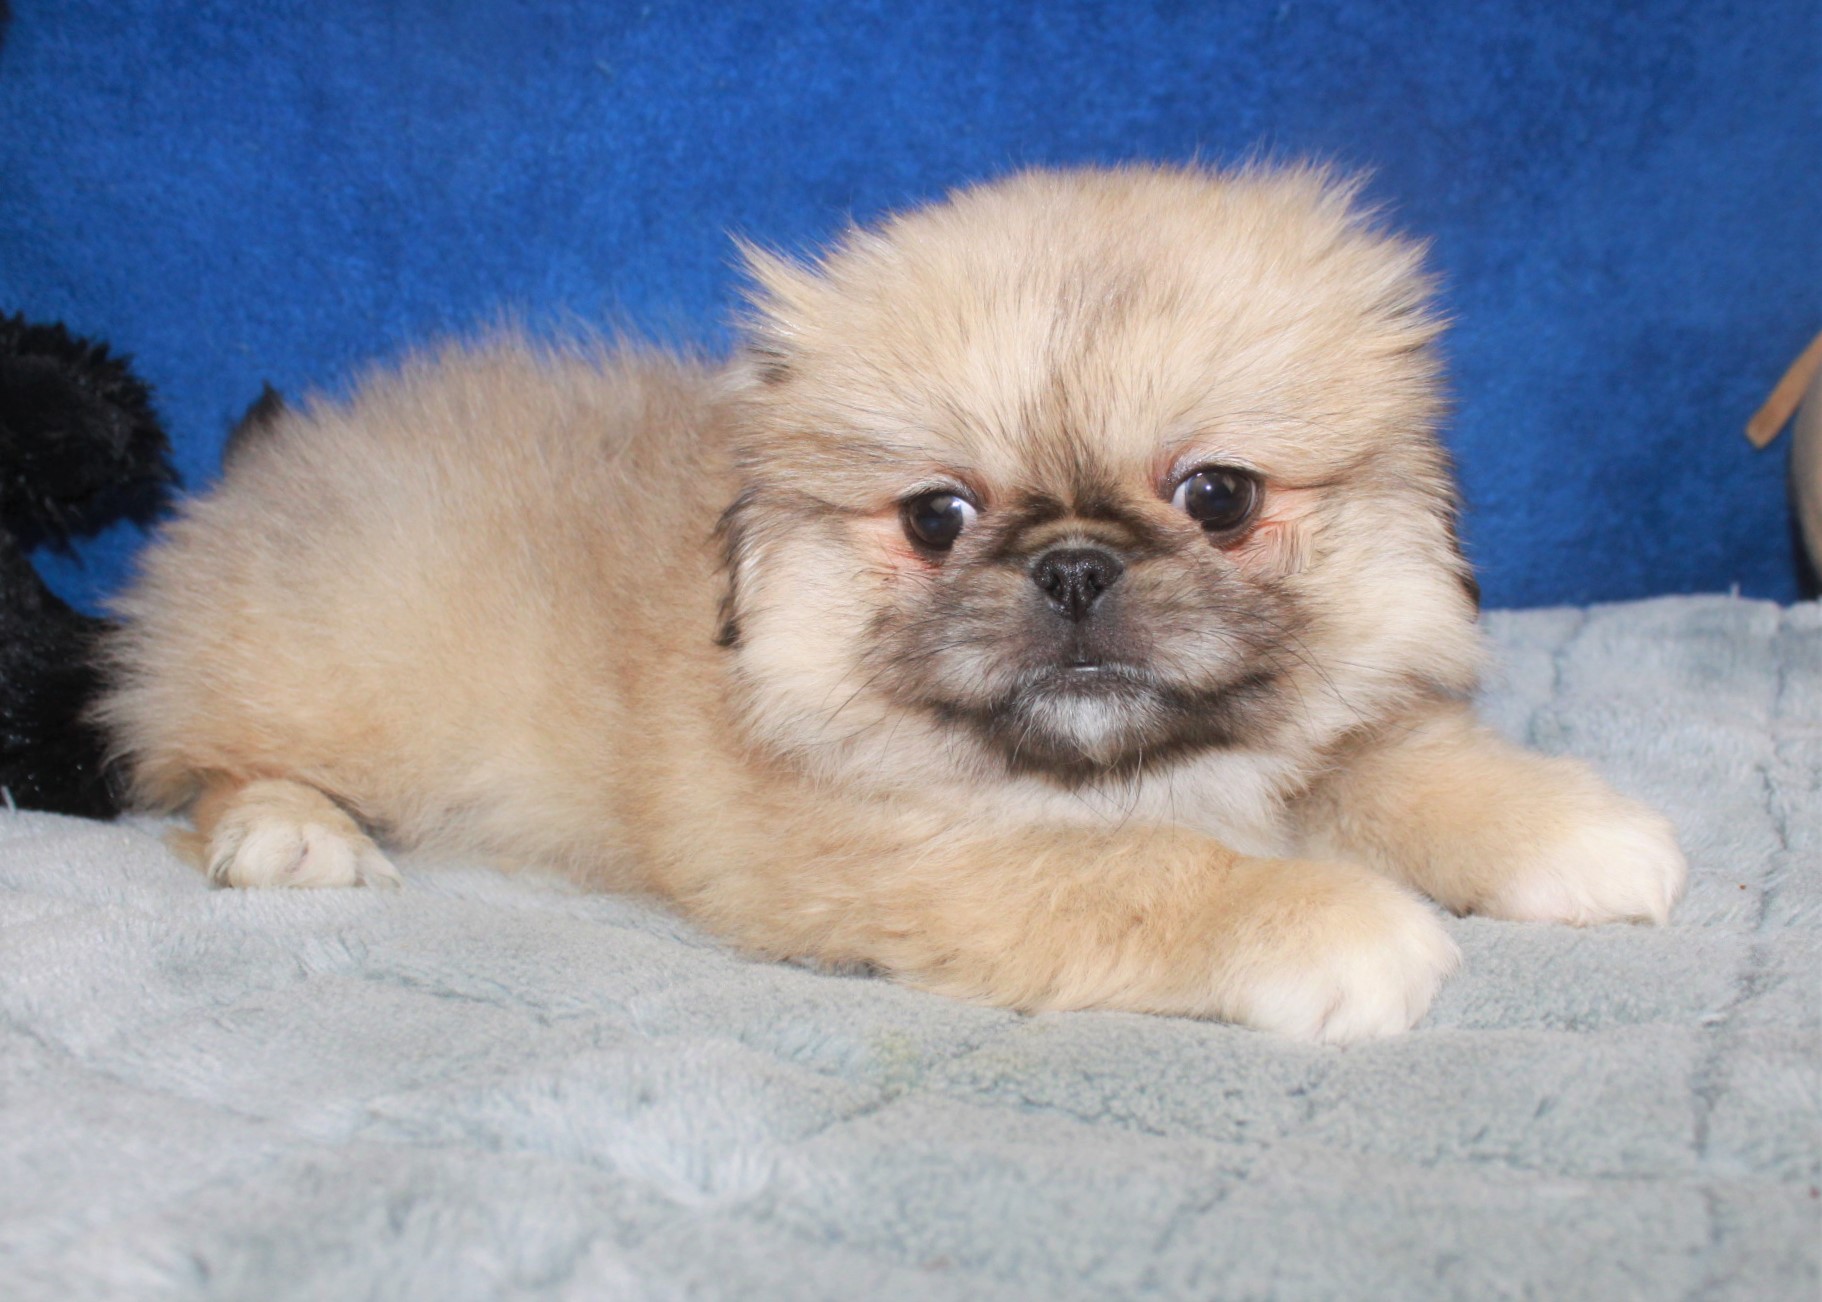 Pekingese Puppies For Sale - Long Island Puppies